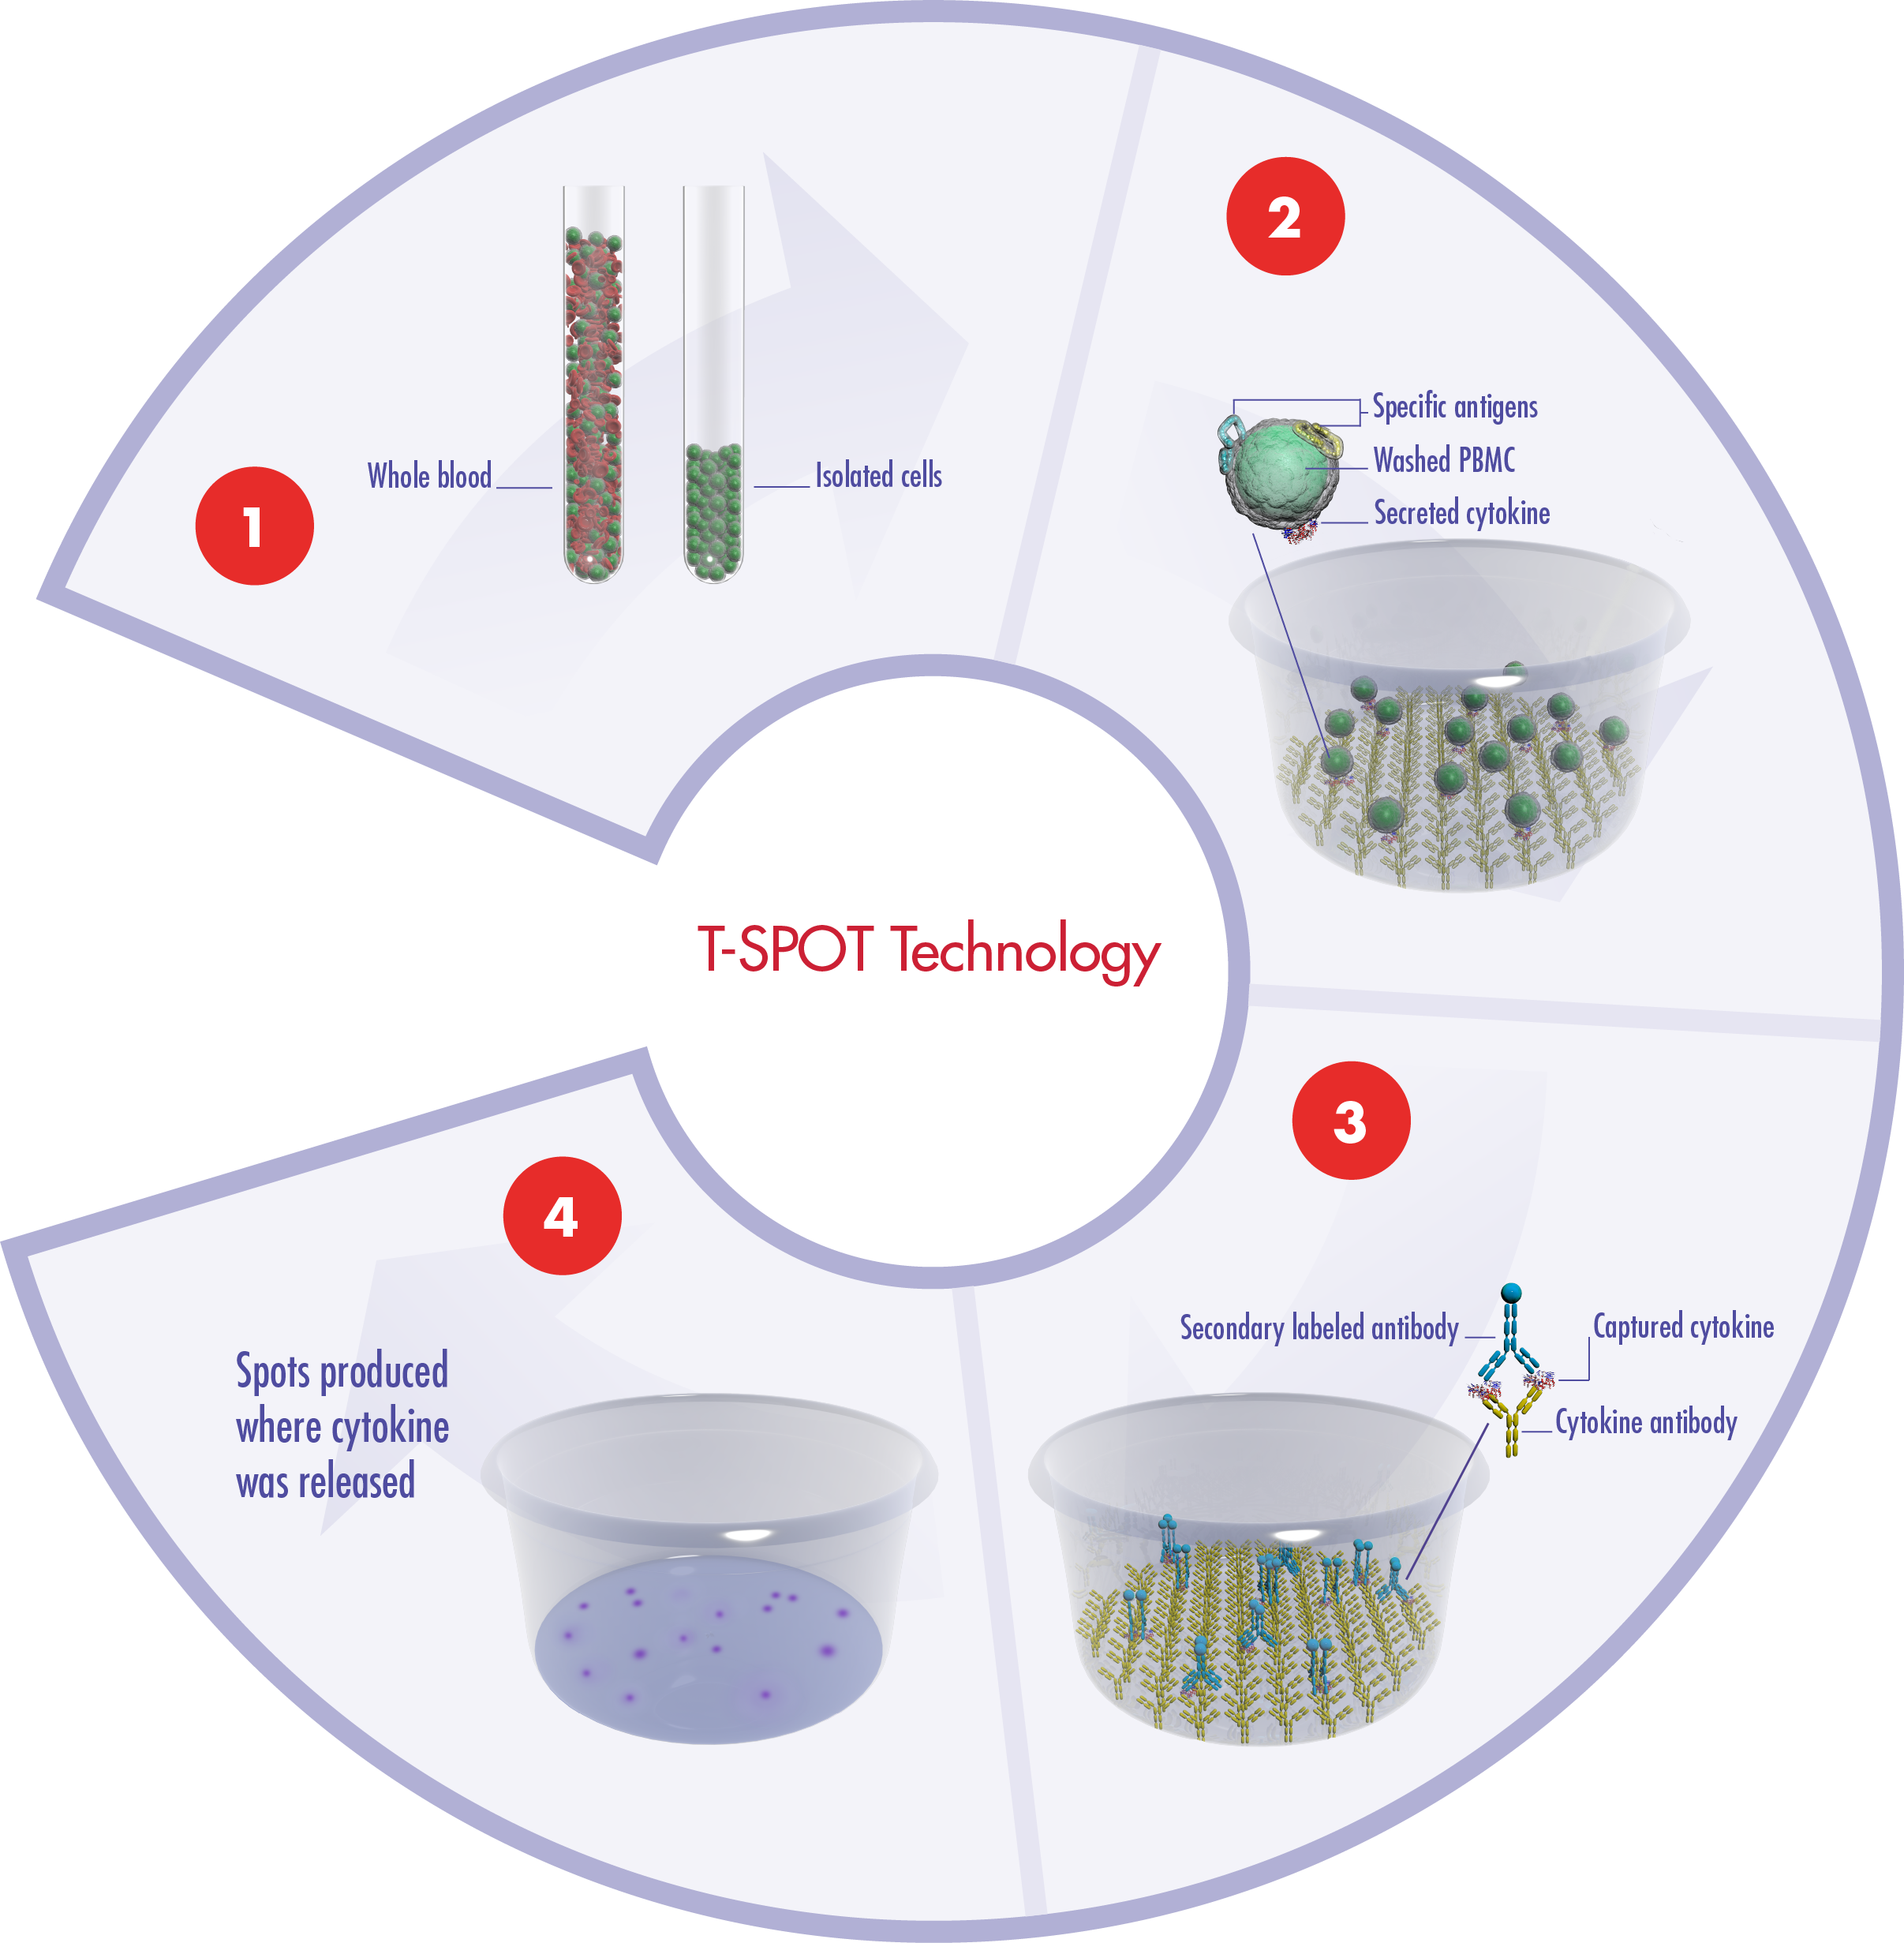 The principles of our T-SPOT assay system using blood as the body fluid in the example